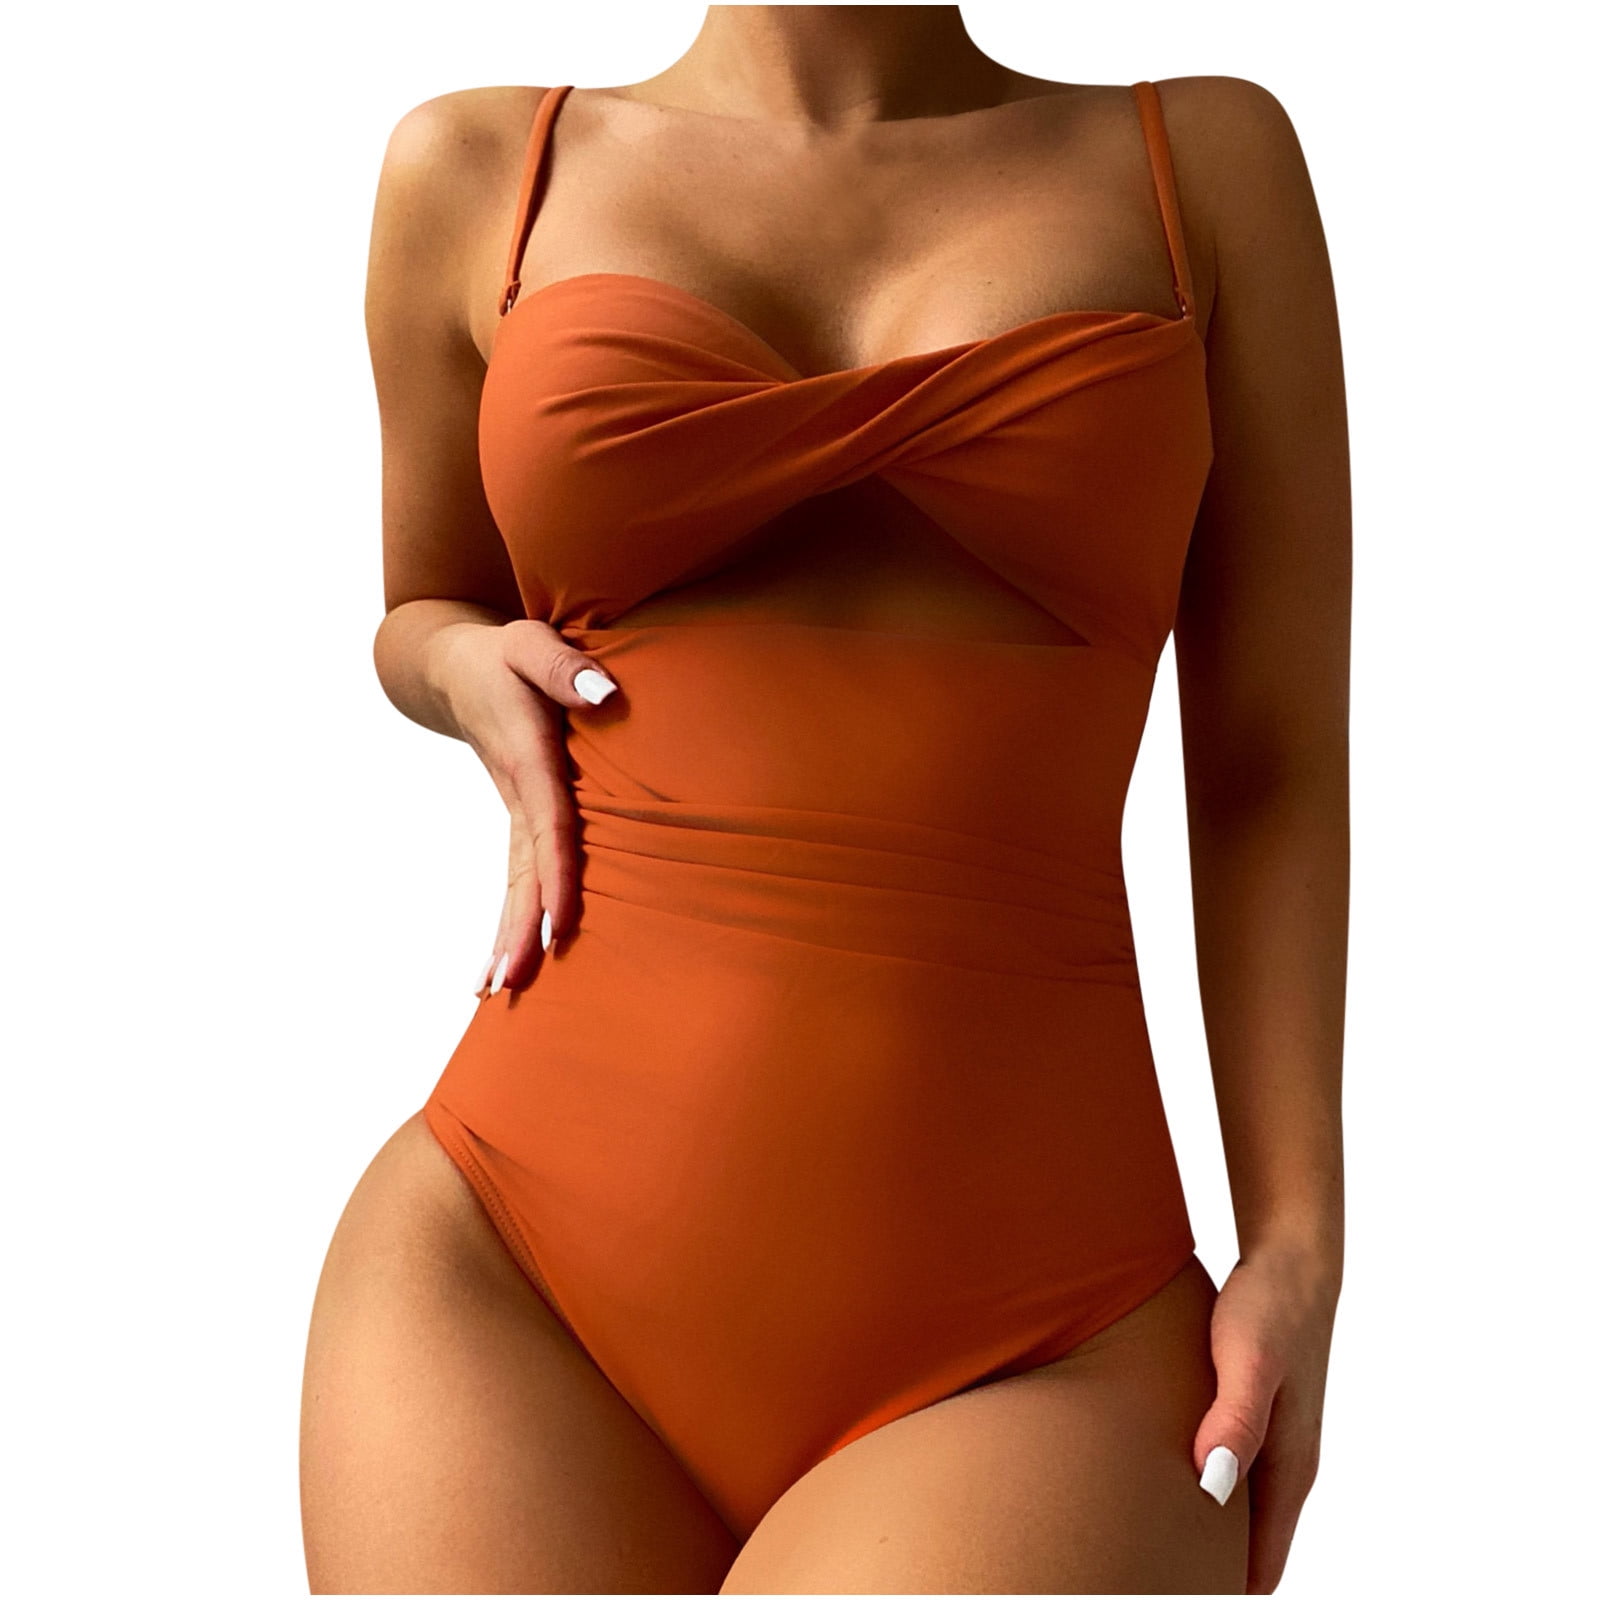 KIJBLAE Women's One Piece Bodysuit Summer Fashion Cozy Outfits for Girls  Solid Color Beachwear Strappy Bathing Suit Twist Ruced Front Swimwear Sets  Discount Coffee L 